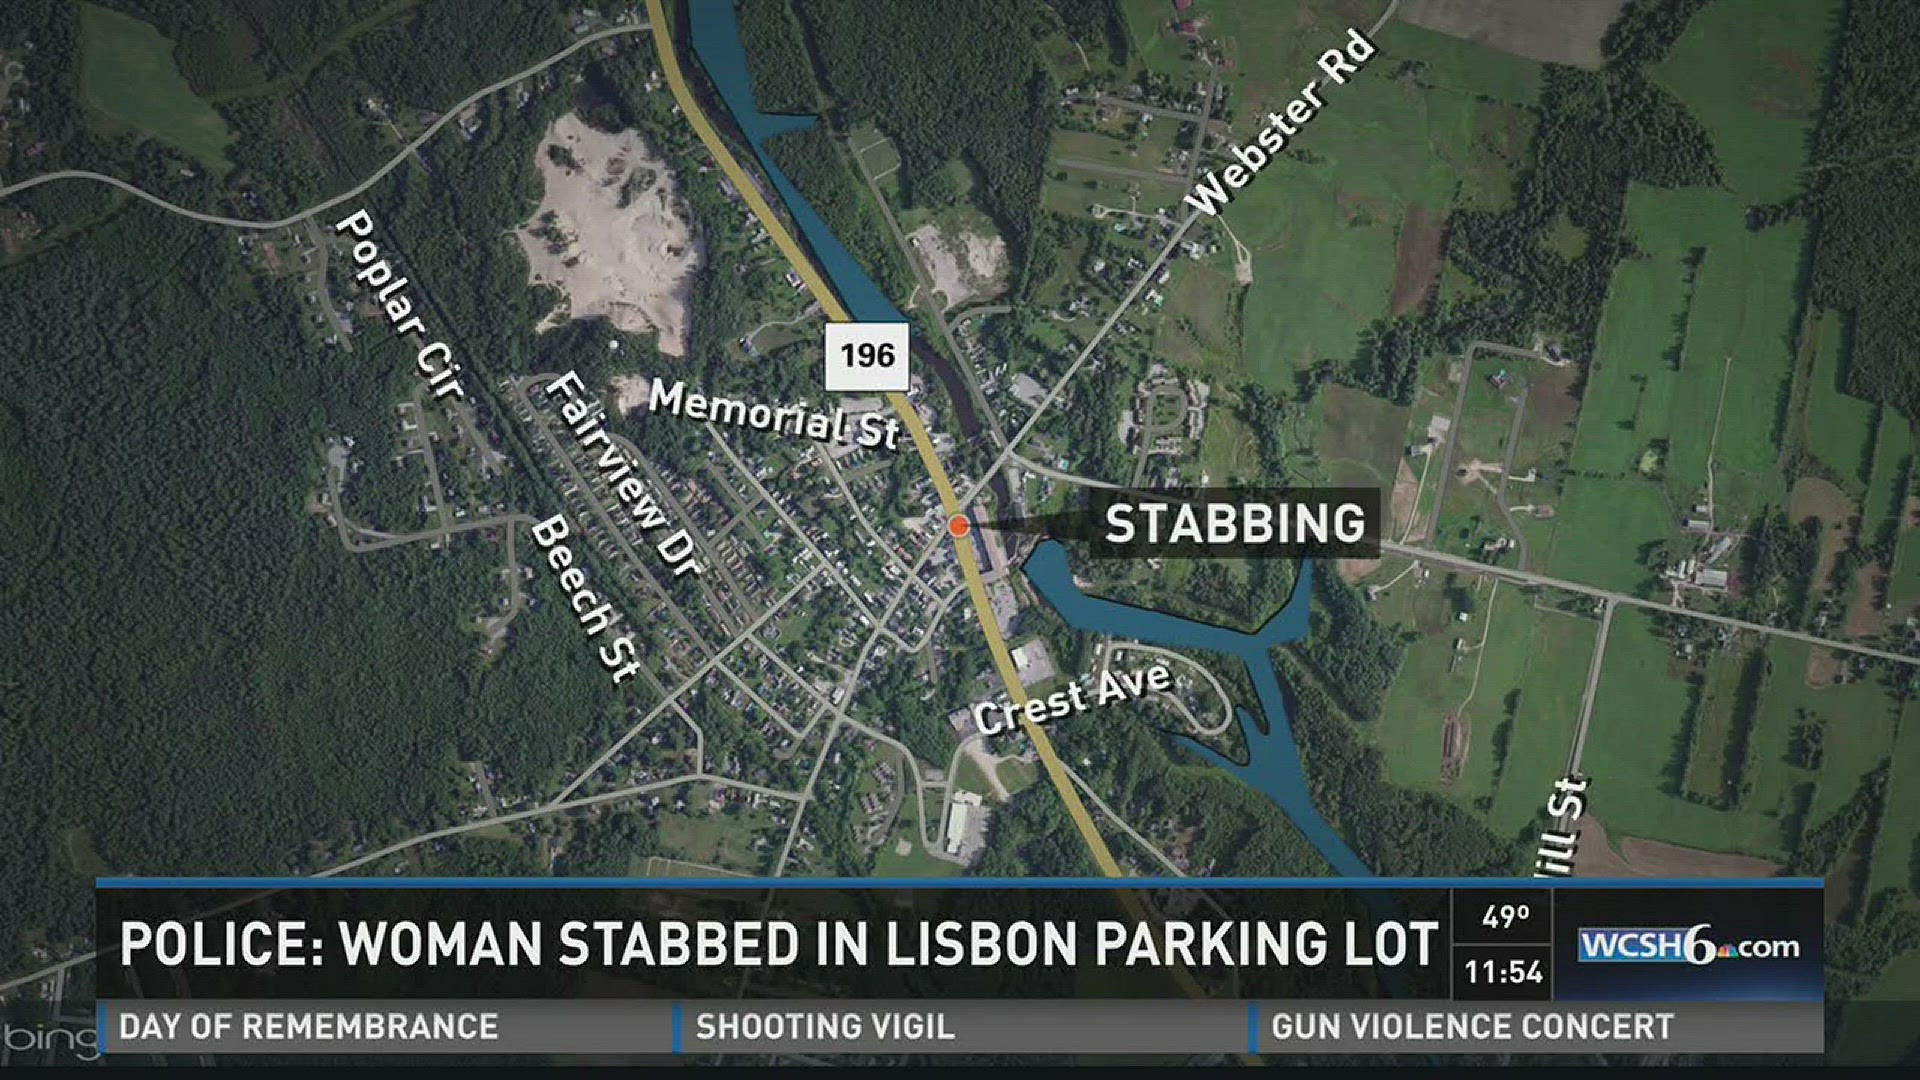 Police: Woman stabbed in Lisbon parking lot